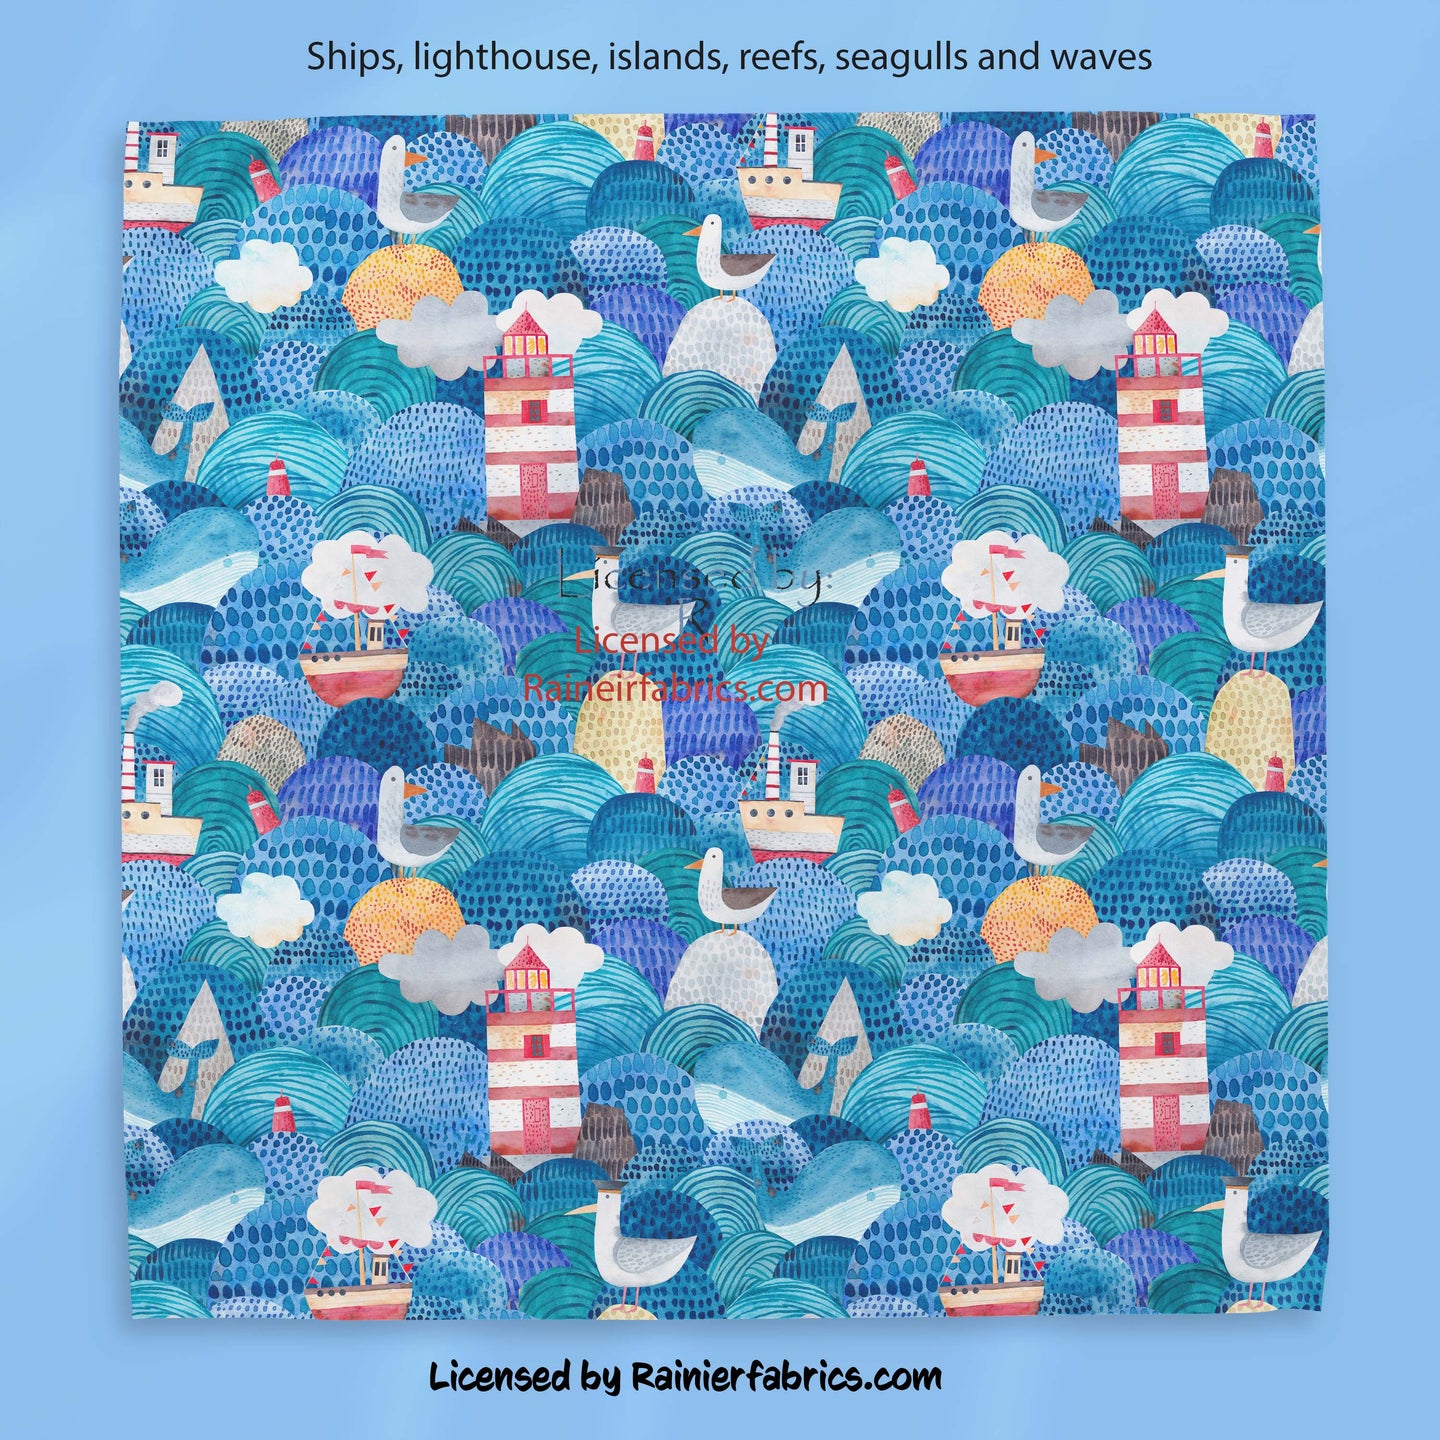 Ships, lighthouse, islands, reefs, seagulls and waves - 2-5 business days to ship - Order by 1/2 yard